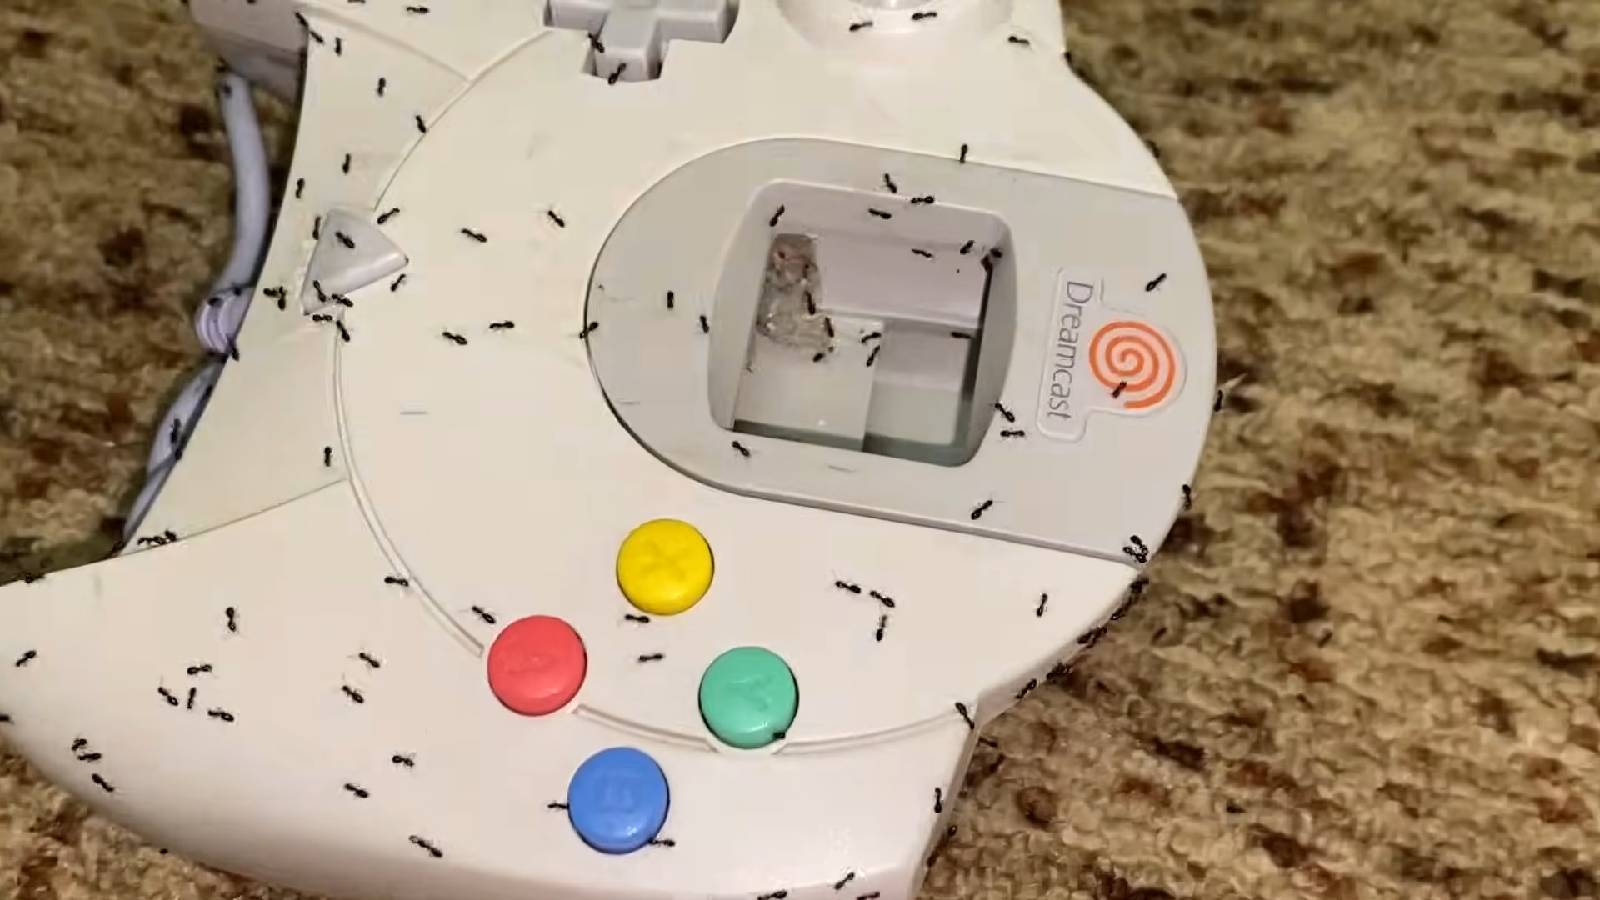 Dreamcast controller infested with ants